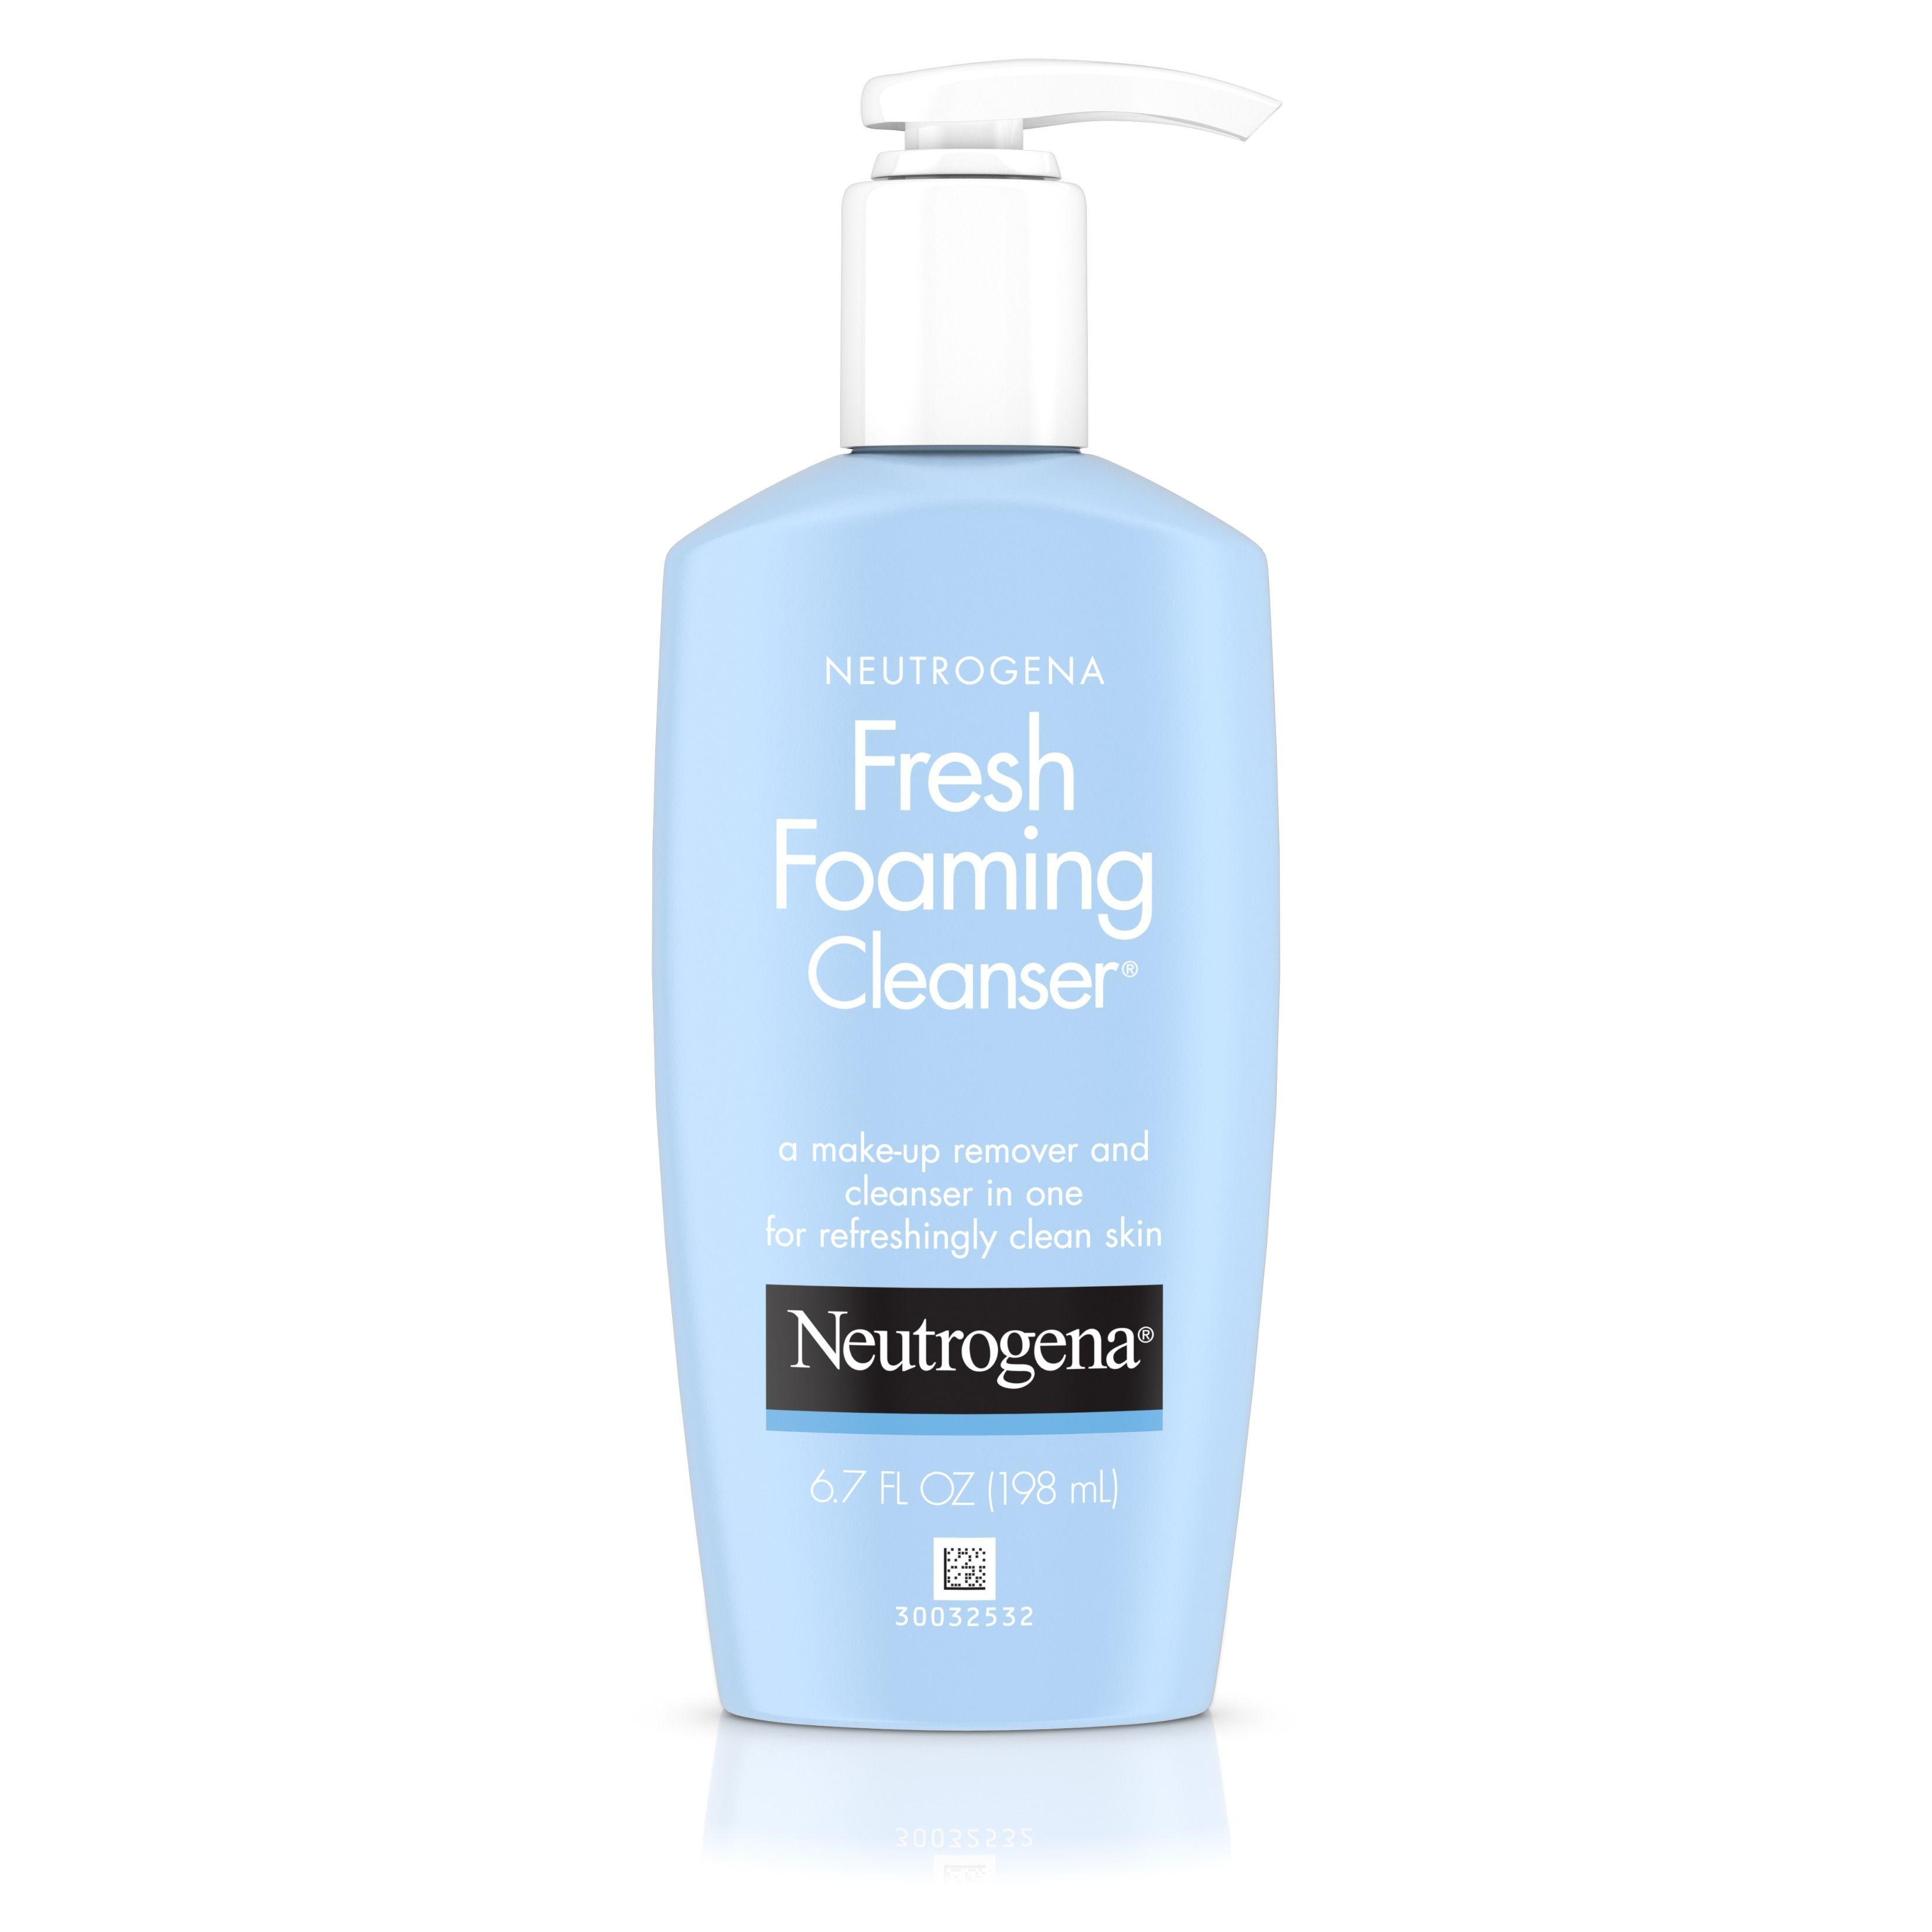 Pro age foaming facial cleanser